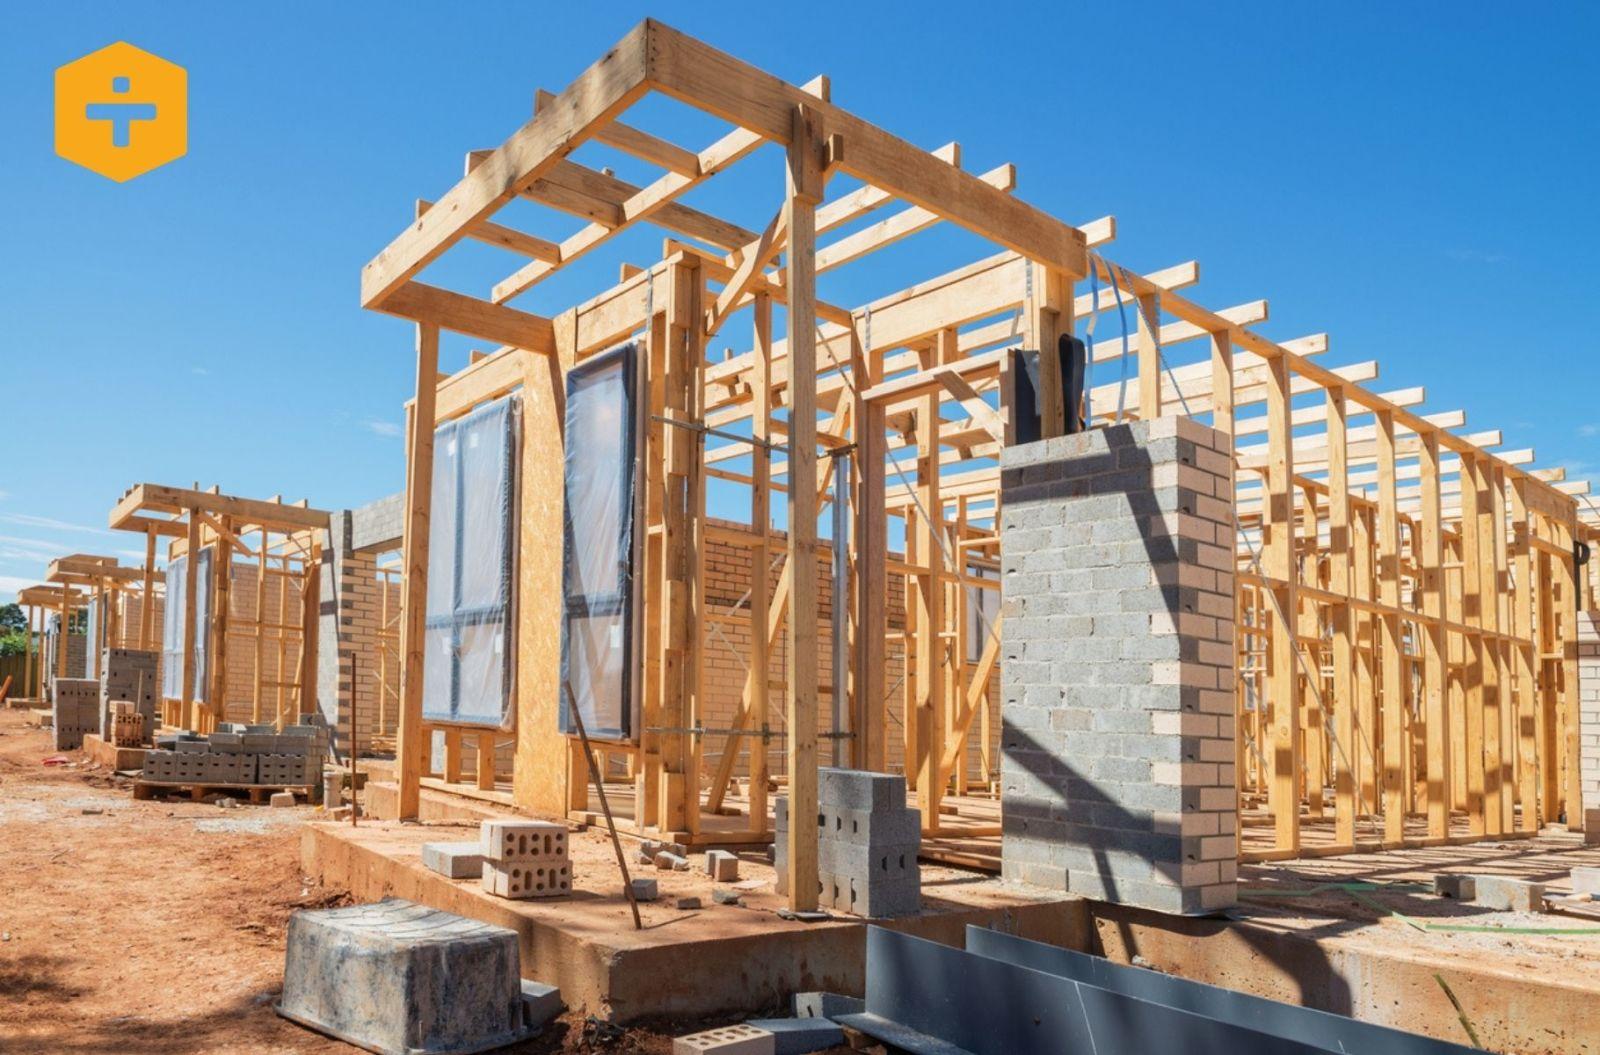 Economists warn the pull-forward of HomeBuilder activity will impact builders into the longer term with cost blowouts hampering delivery...